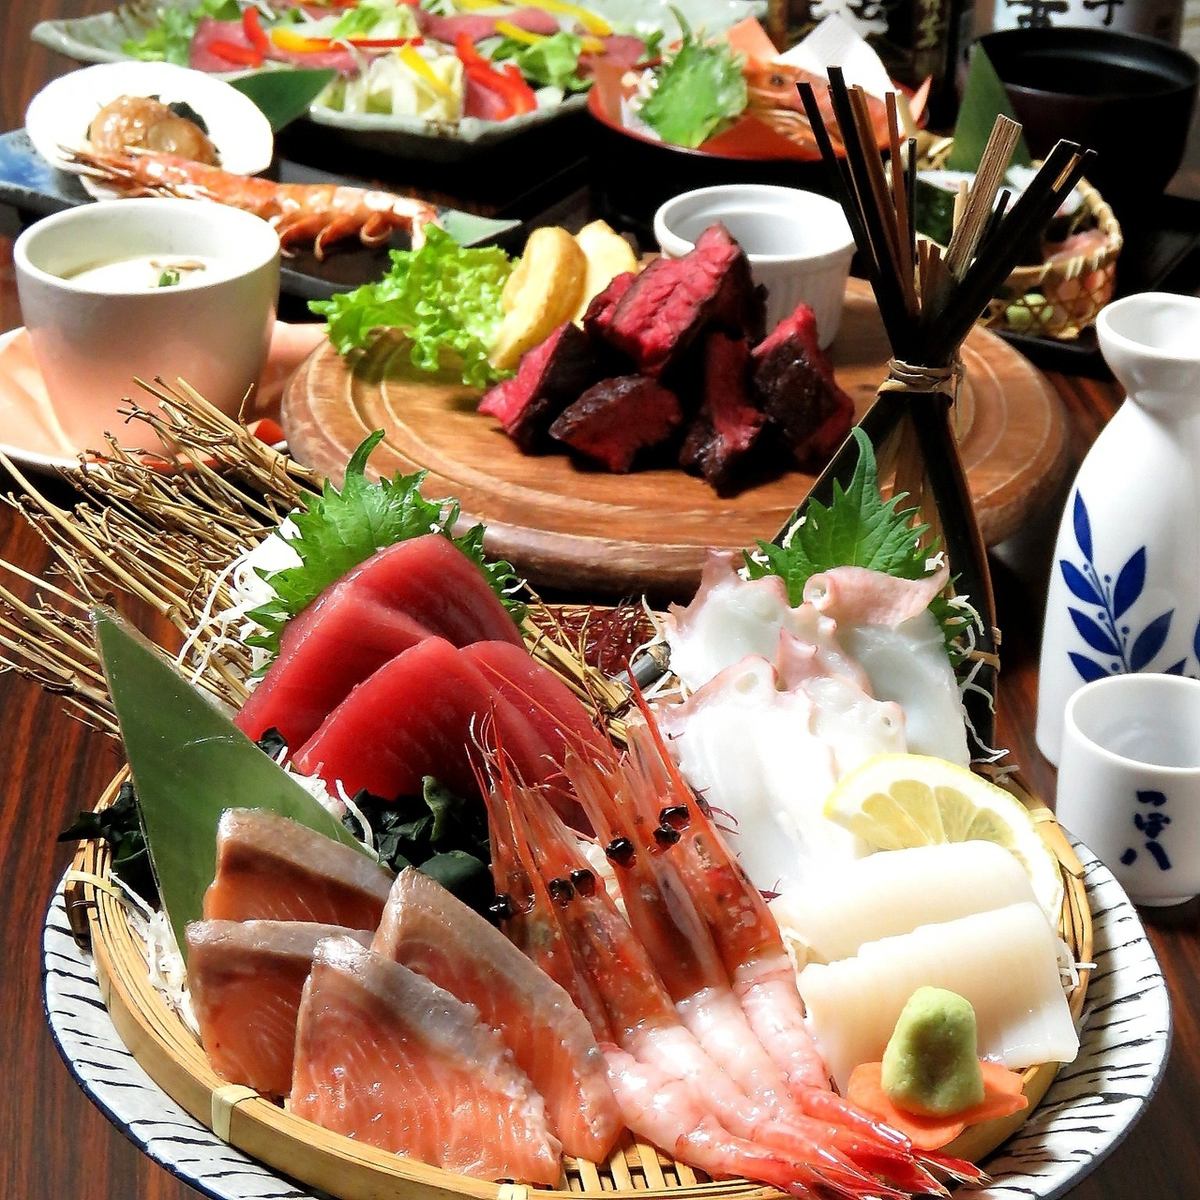 Enjoy sashimi as well! Hamamatsu Ekimae Course 3,500 JPY (incl. tax) with all-you-can-drink for 2 hours